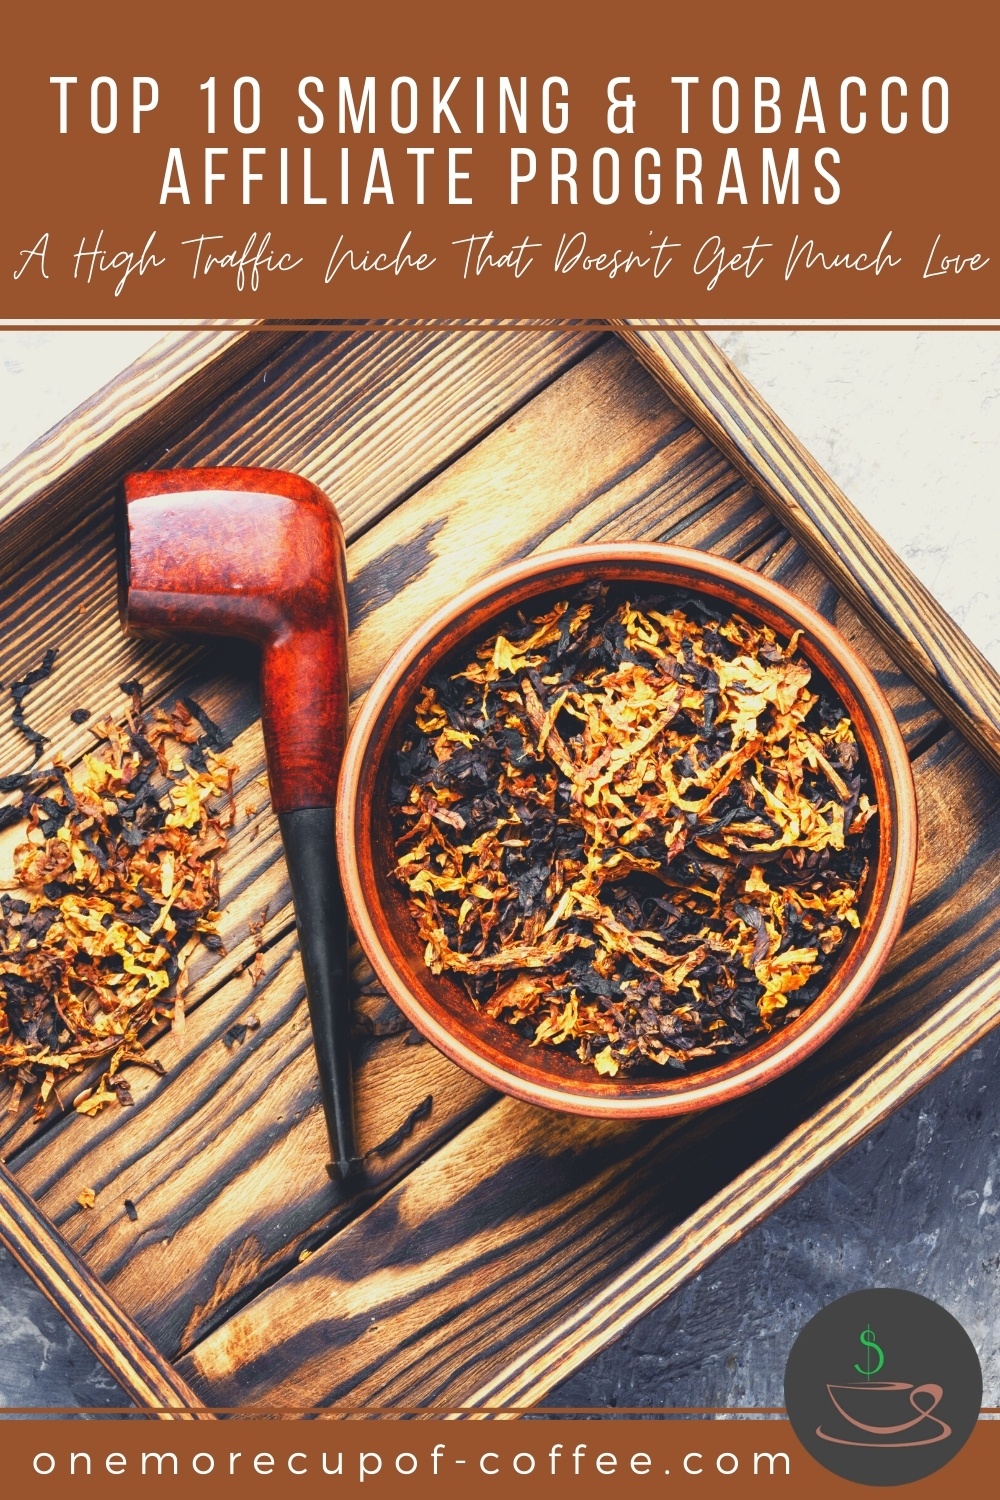 red tobacco pipe with loose tobacco leaves on a small bowl, on a wooden serving tray; with text at the top in brown banner 